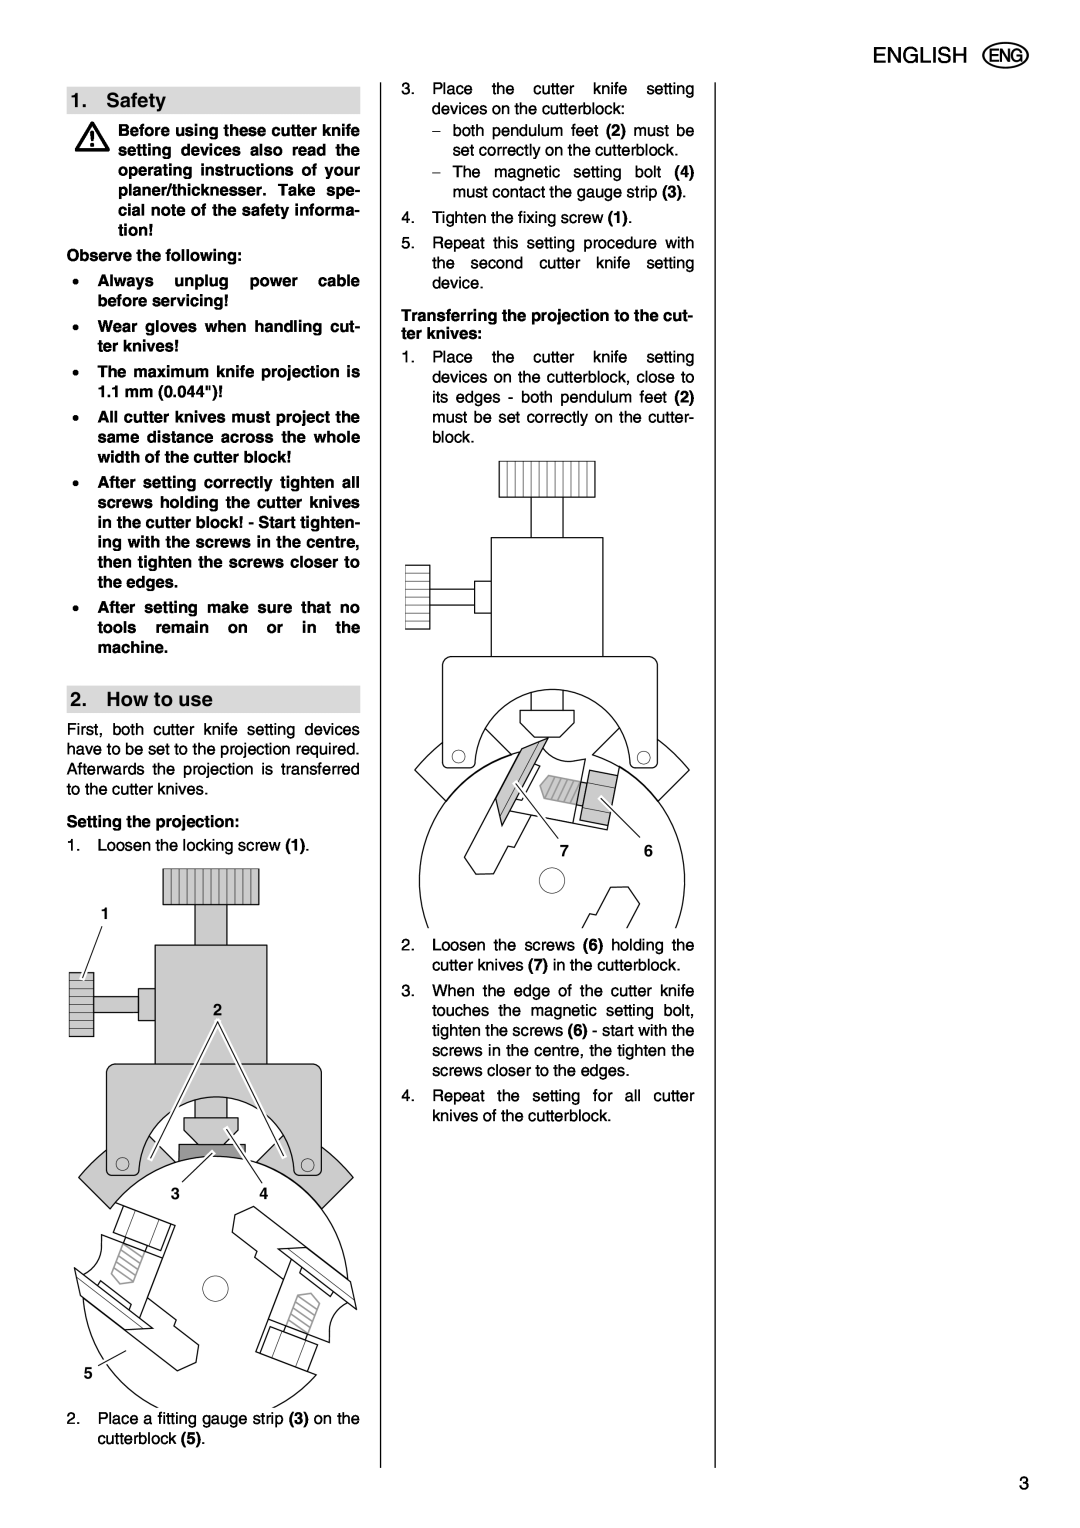 Metabo 091 101 6397 manual English, Safety, How to use 